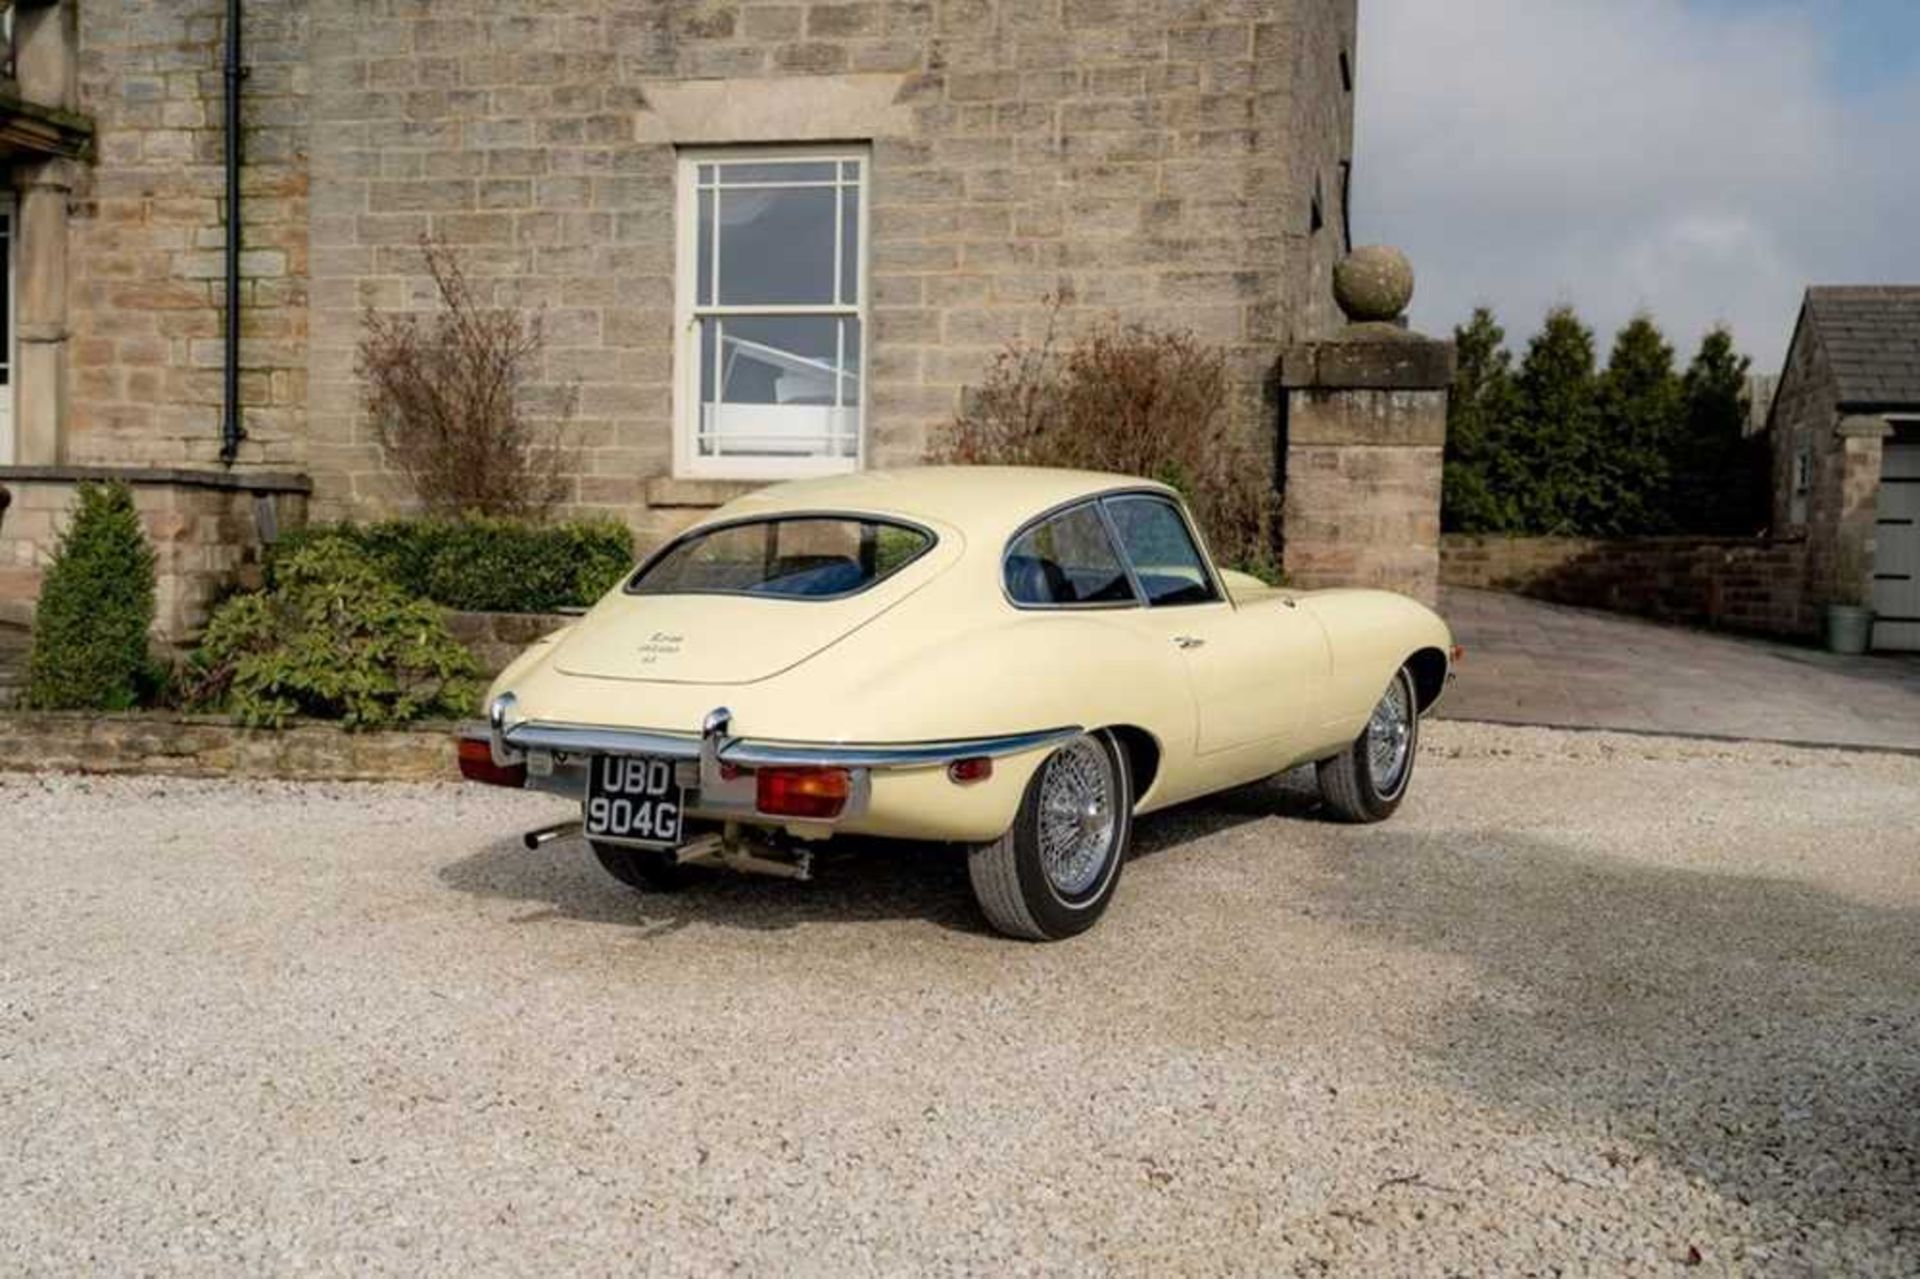 1968 Jaguar E-Type 4.2 Litre Coupe Genuine 44,000 miles from new - Image 6 of 68